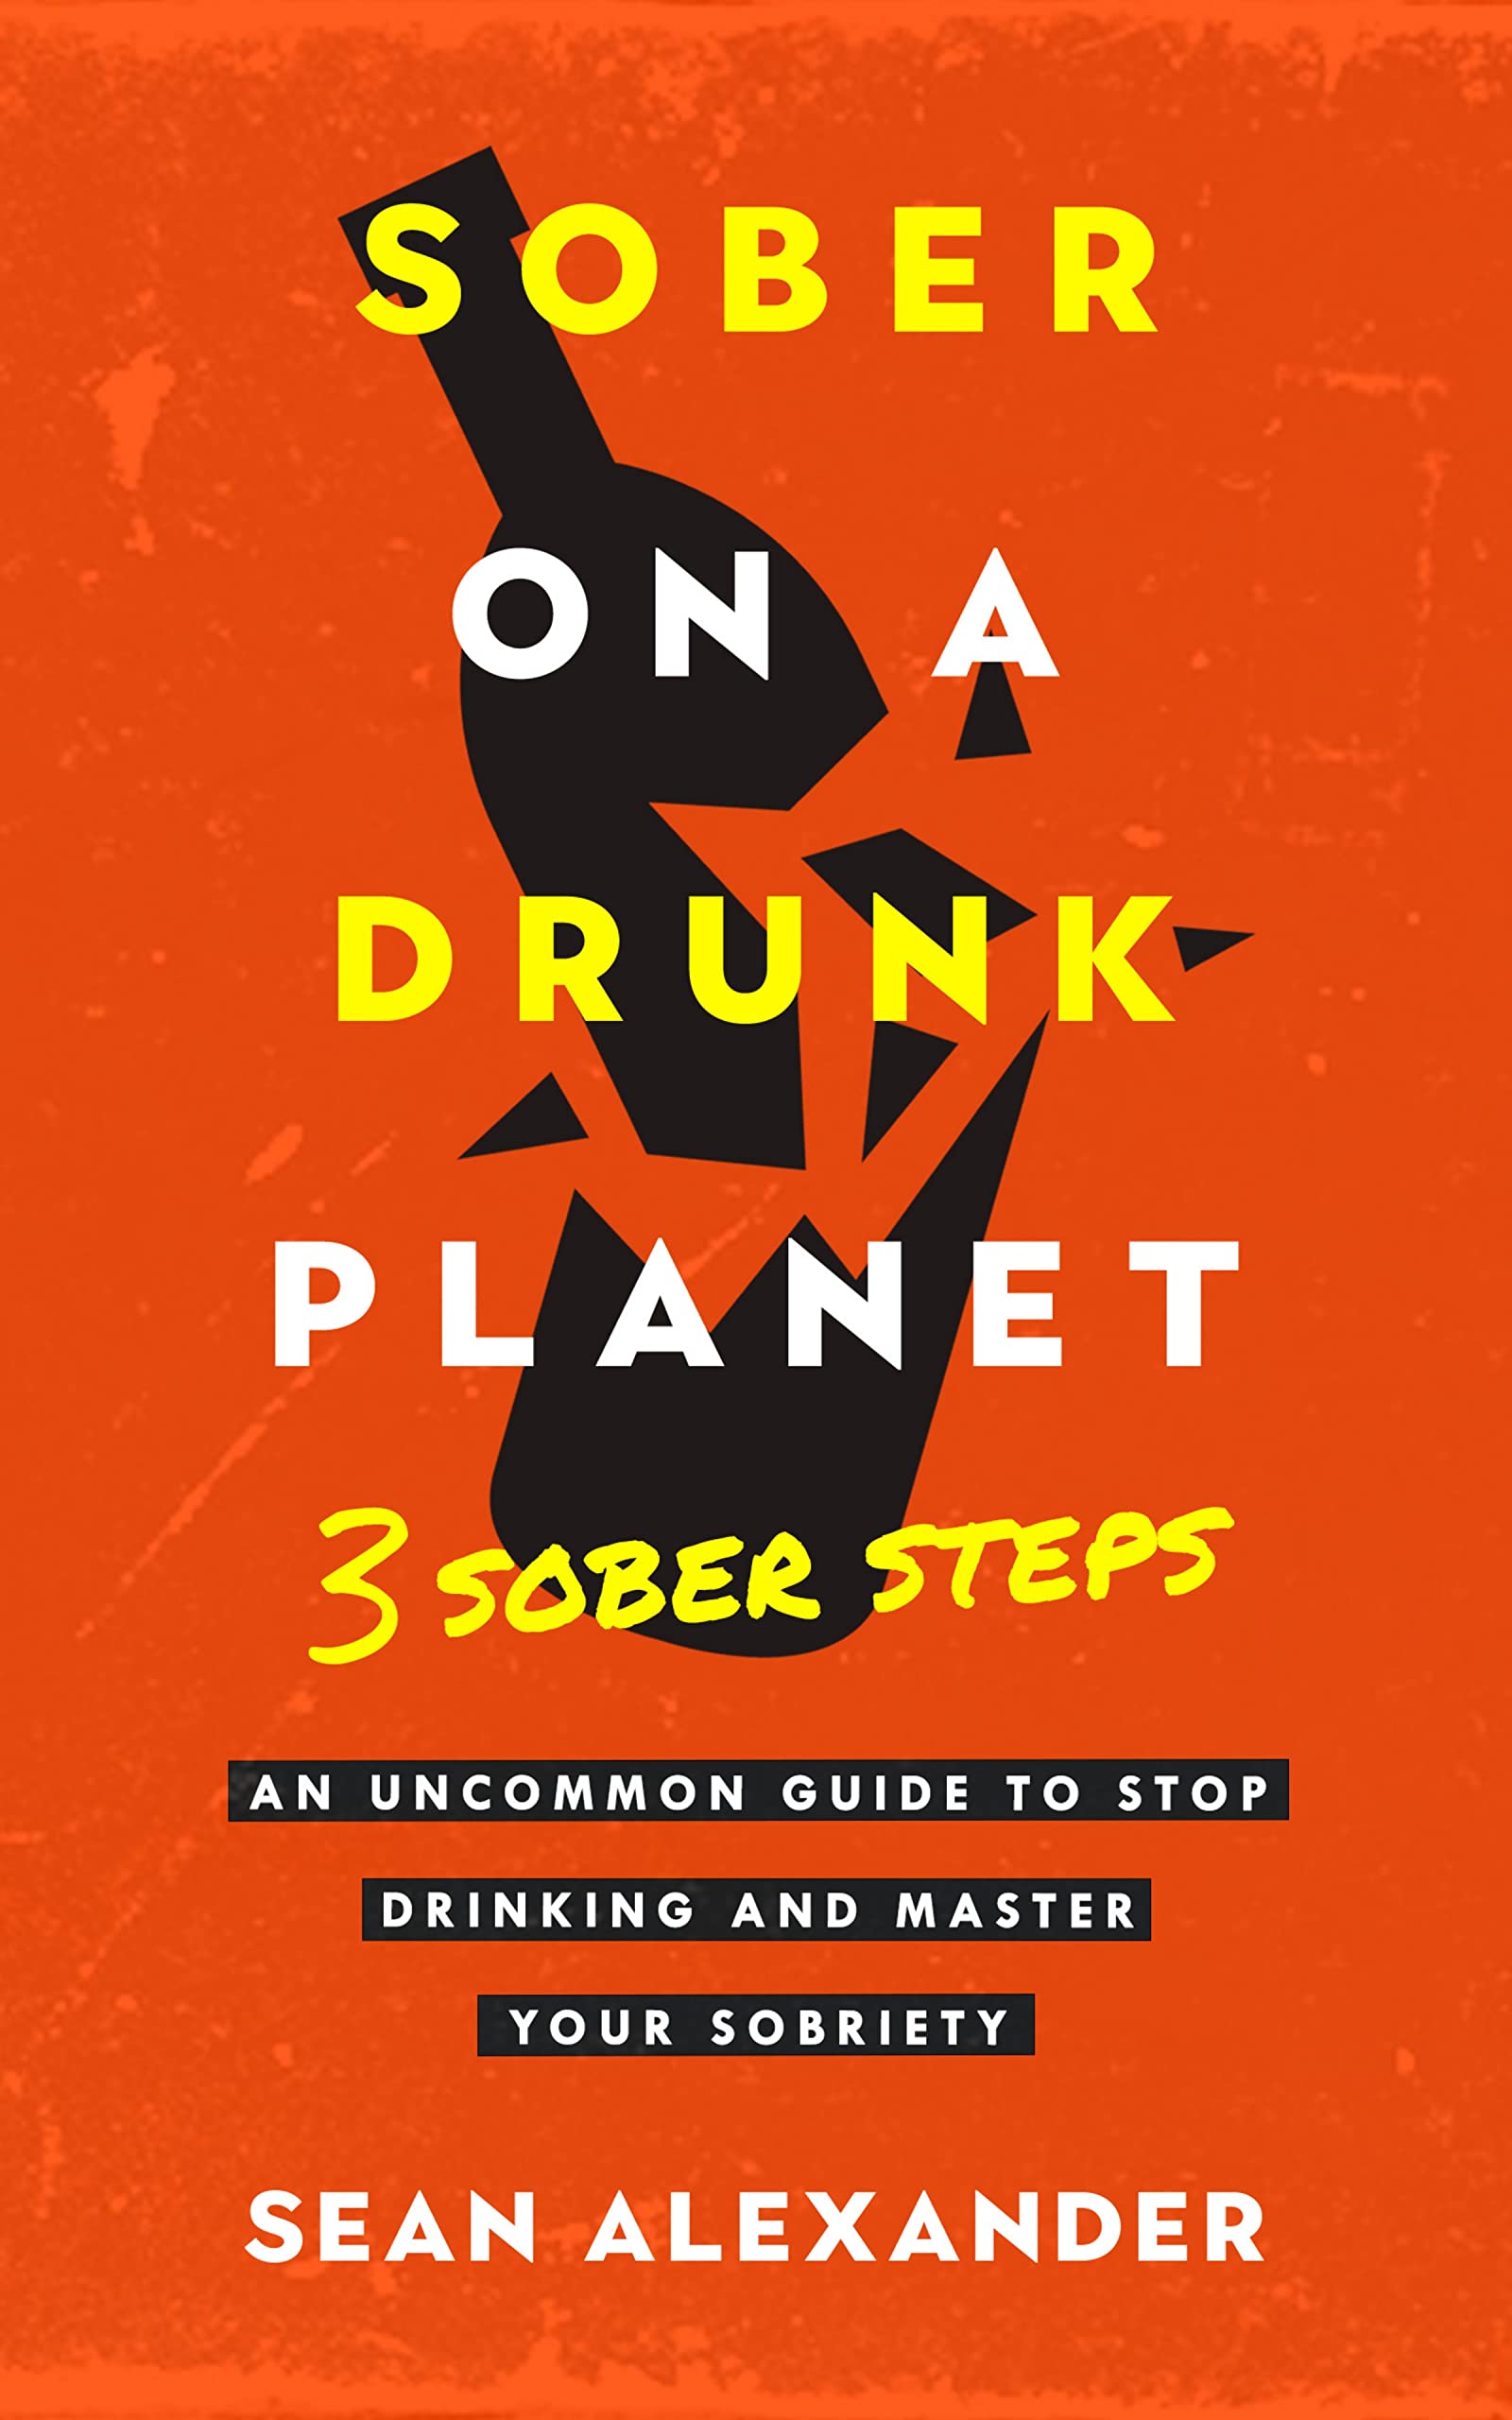 Sober On A Drunk Planet: 3 Sober Steps. An Uncommon Guide To Stop Drinking and Master Your Sobriety (Quit Lit Sobriety Series)